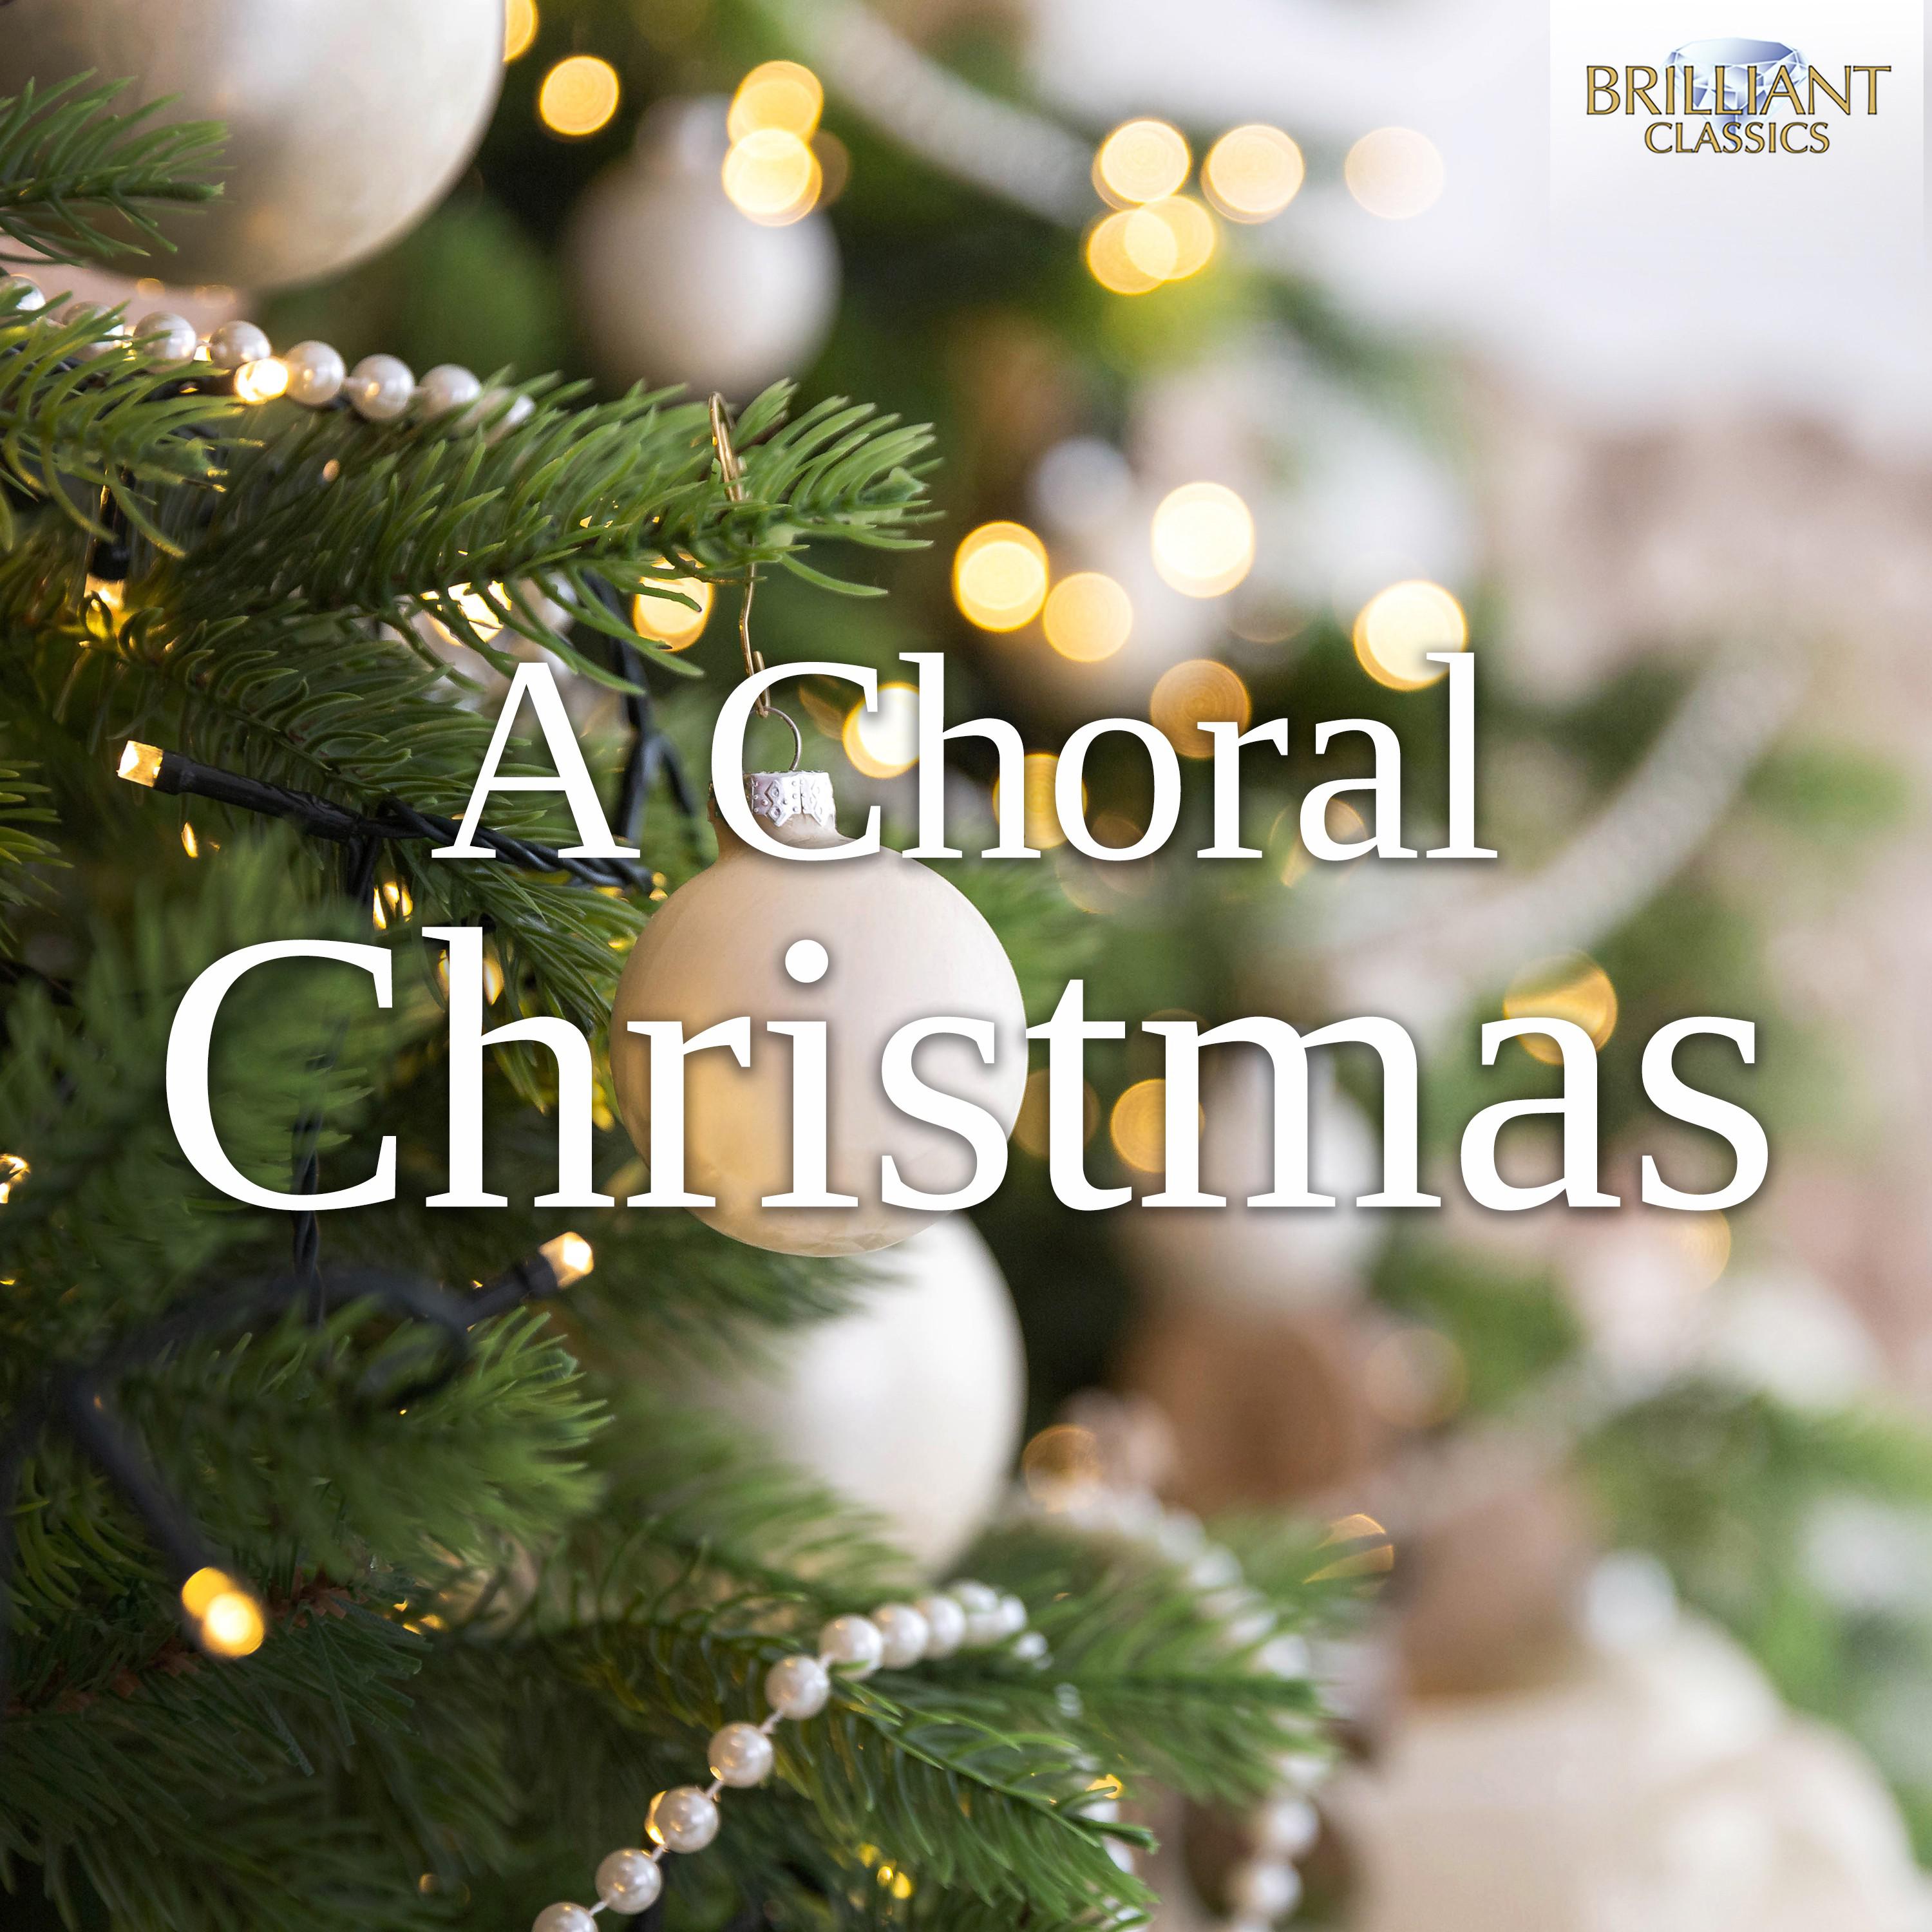 Messiah, HWV 56, Pt. 1: XII. For Unto us a Child is Born